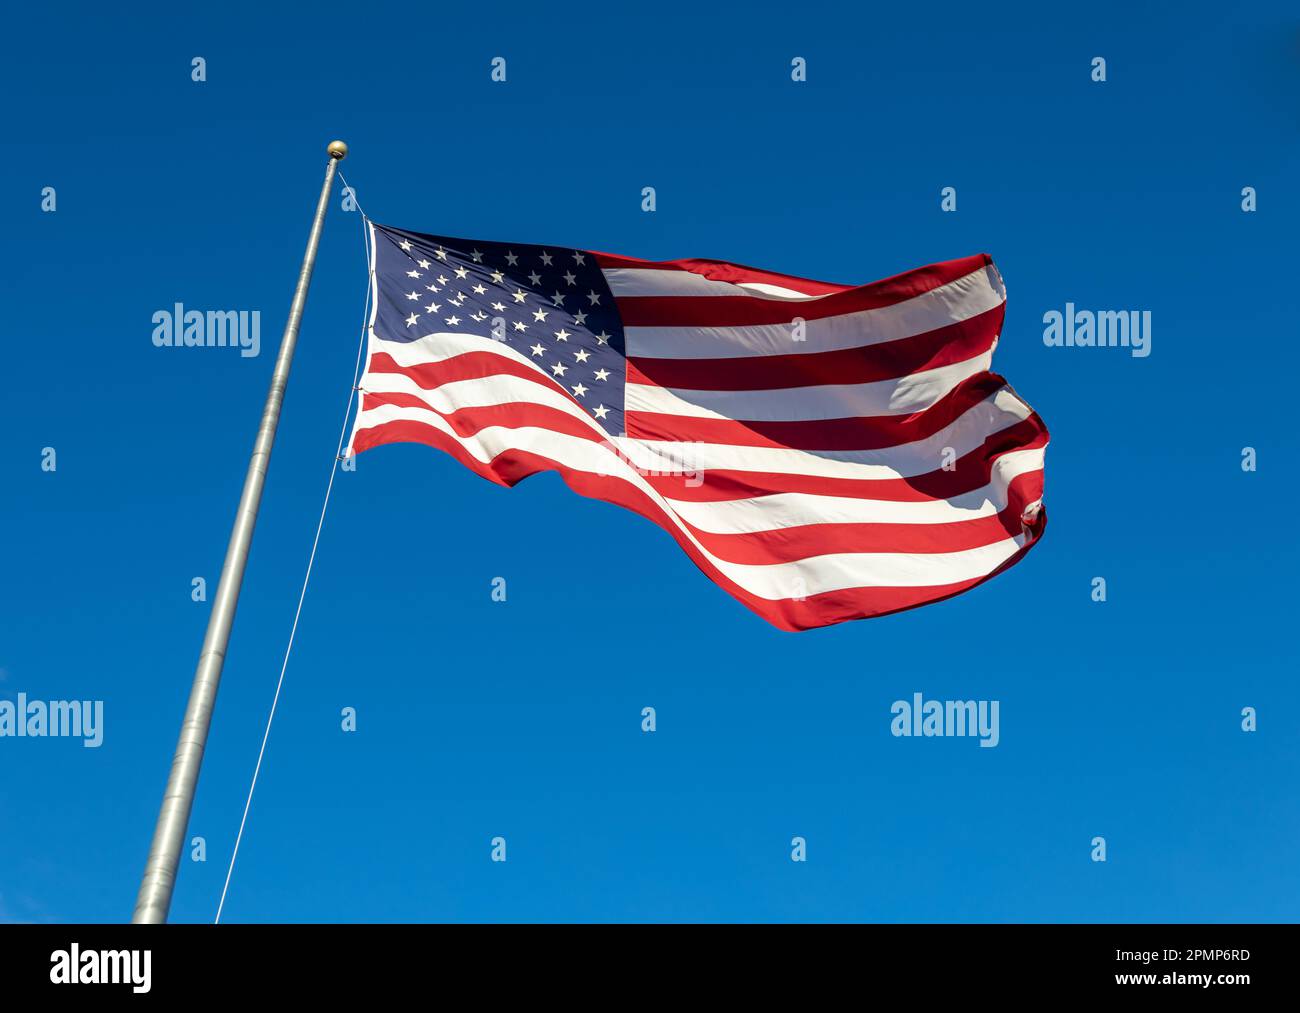 Close up view of an American flag waving on a flagpole, with blue sky background Stock Photo